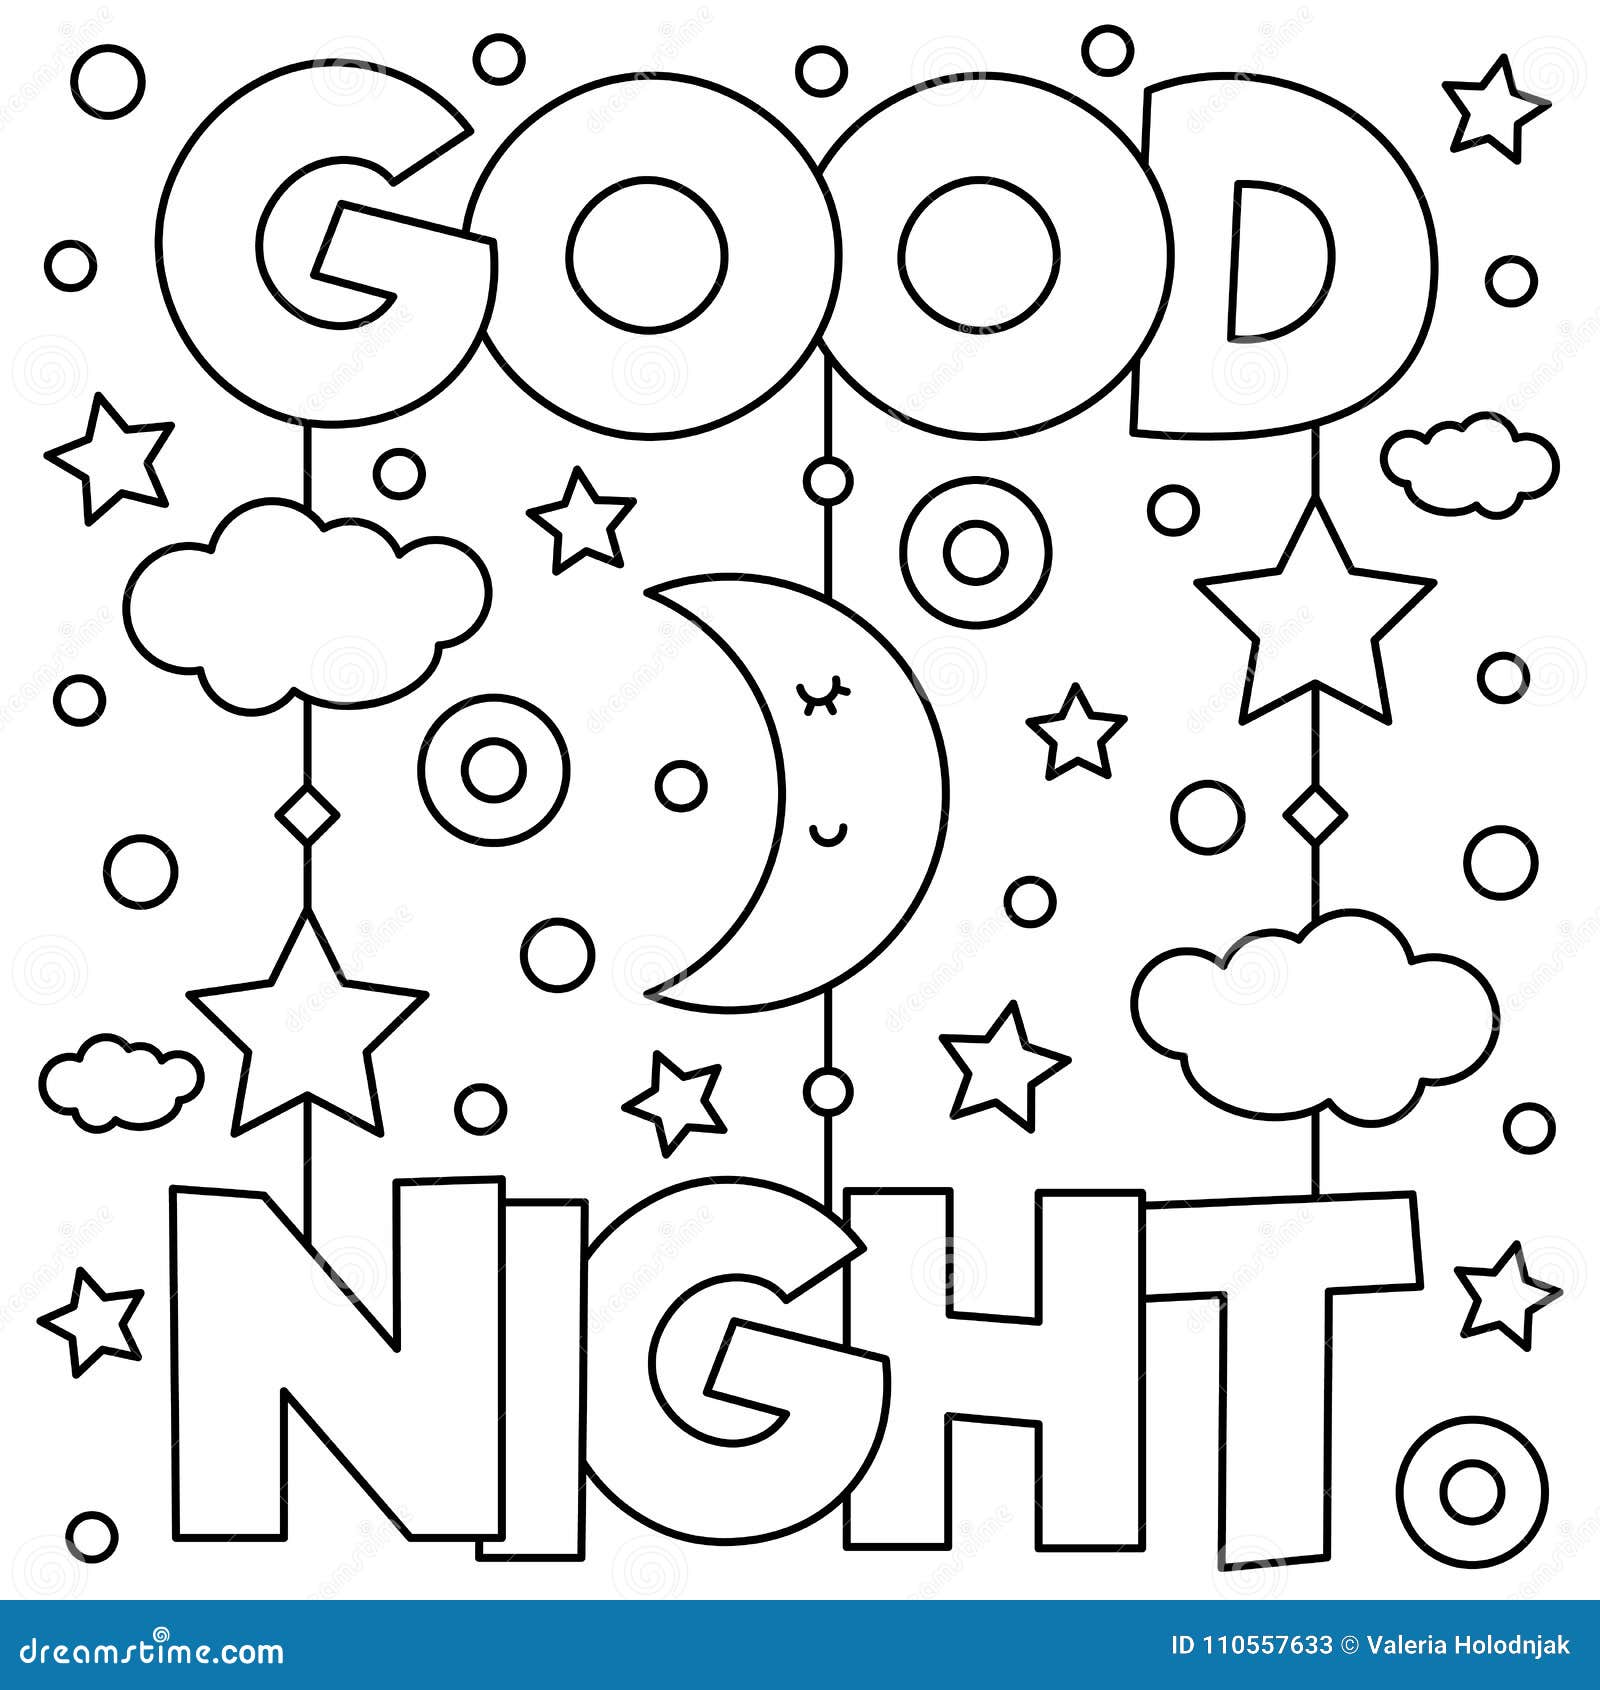 Download Good Night. Coloring Page. Vector Illustration. Stock Vector - Illustration of drawing, adult ...